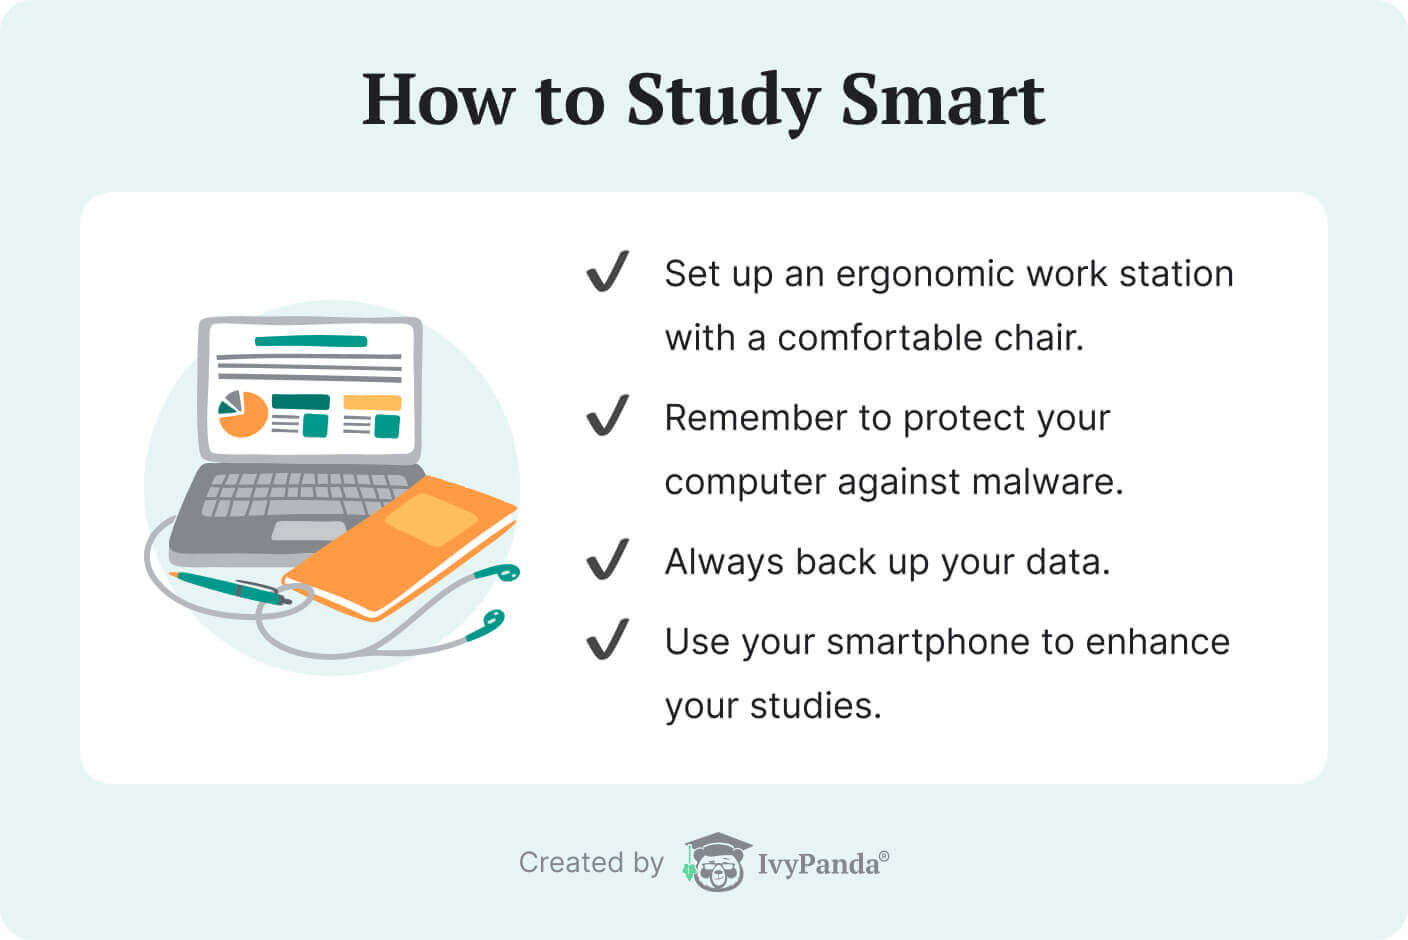 The picture enumerates tips for studying smart in college.